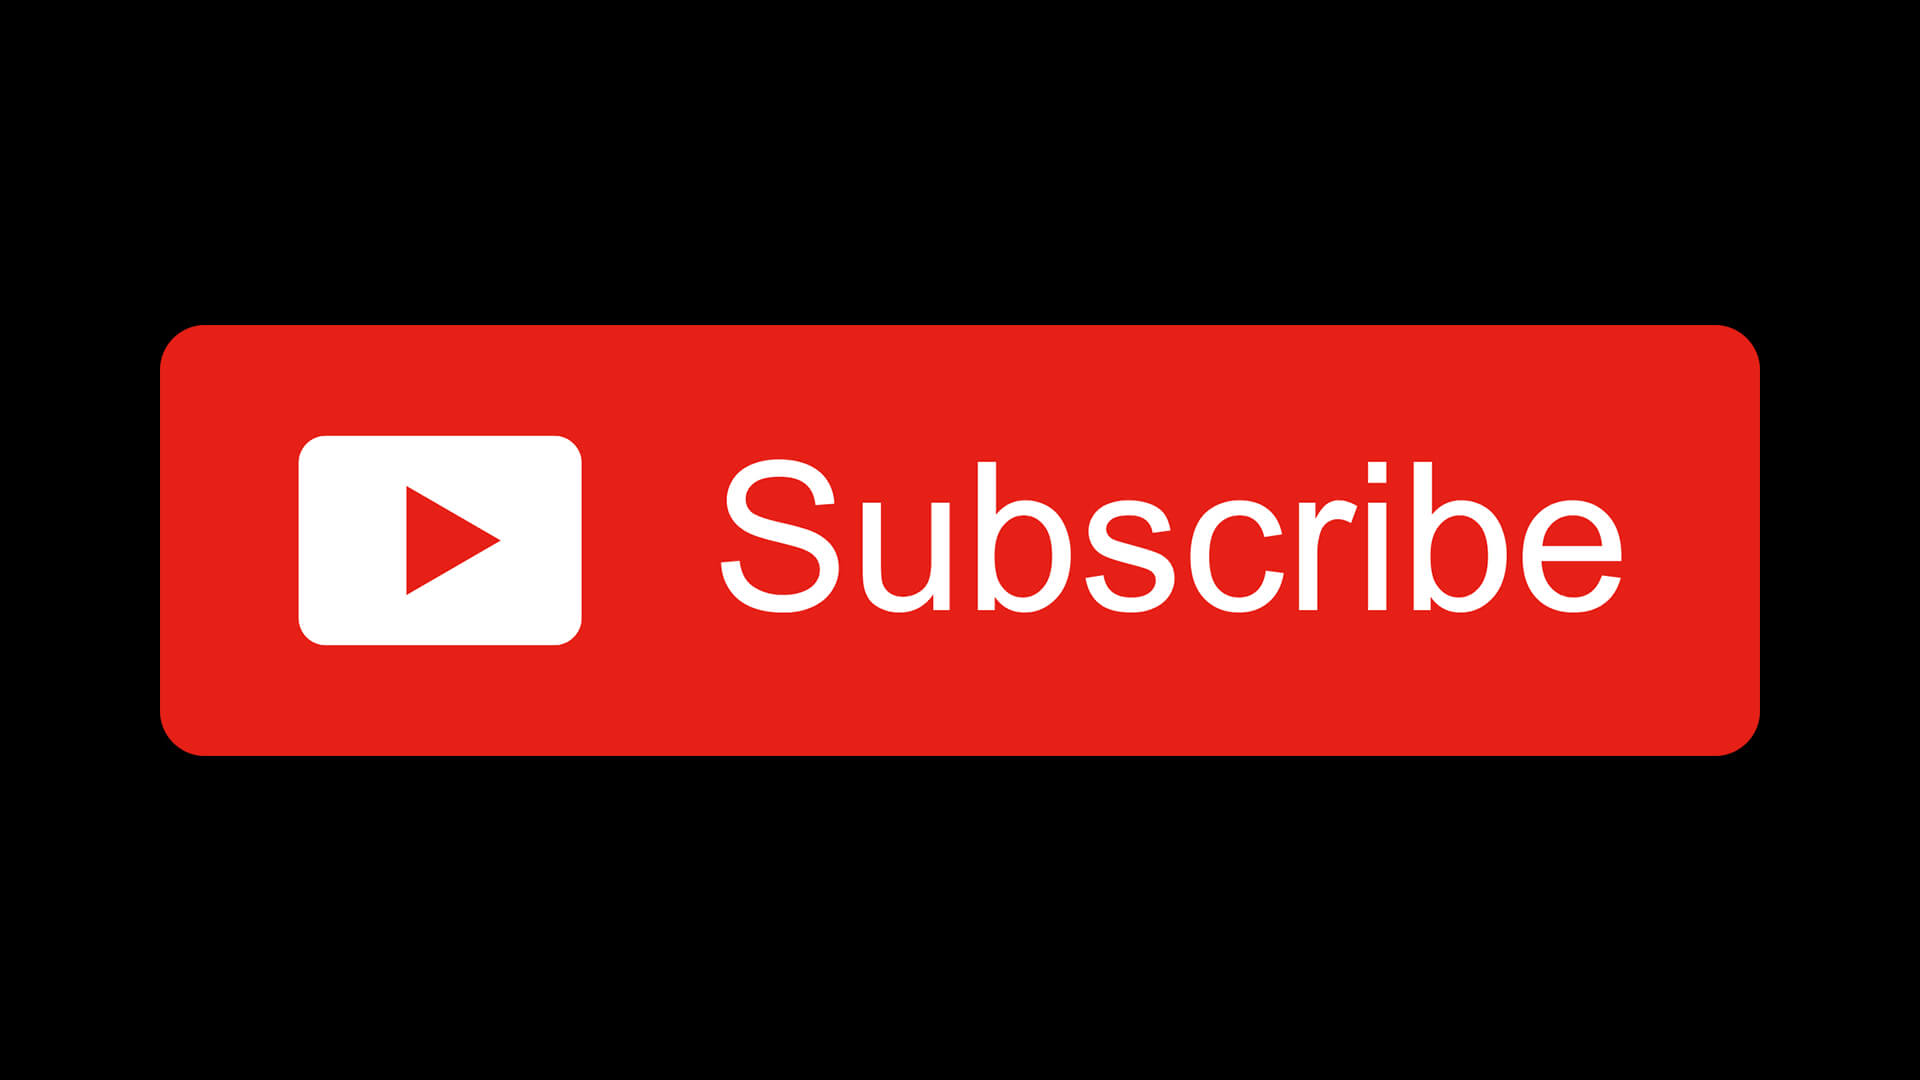 Free-YouTube-Subscribe-Button-Download-Design-Inspiration-By-AlfredoCreates-8